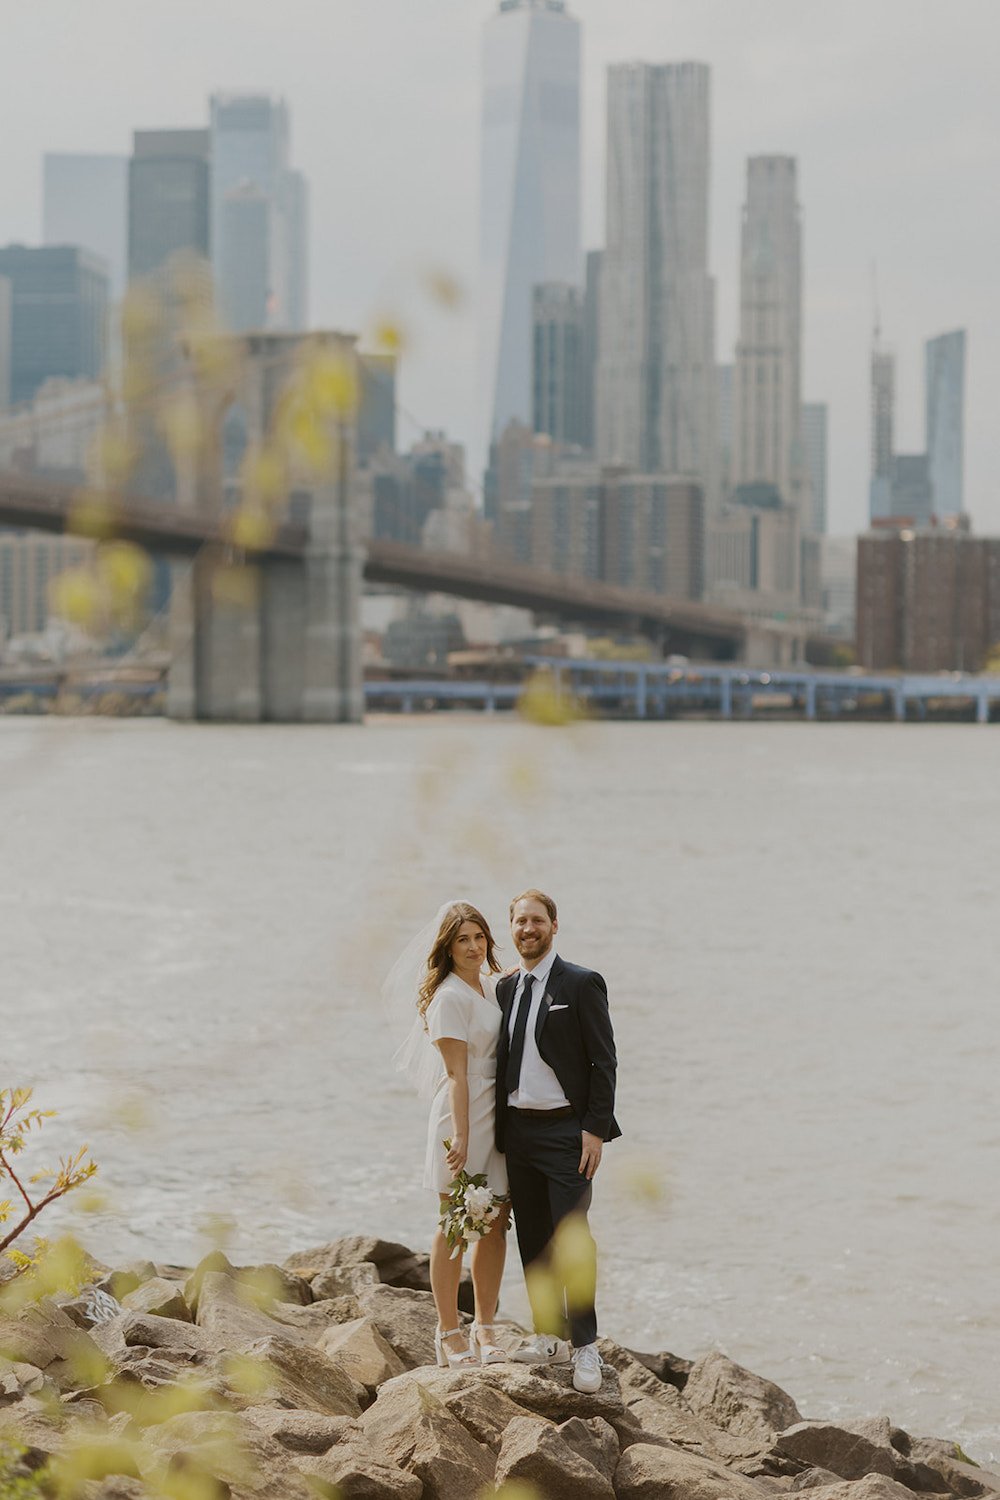 Couple standing on the rocks near the water with the Brooklyn Bridge and City scape in the background.